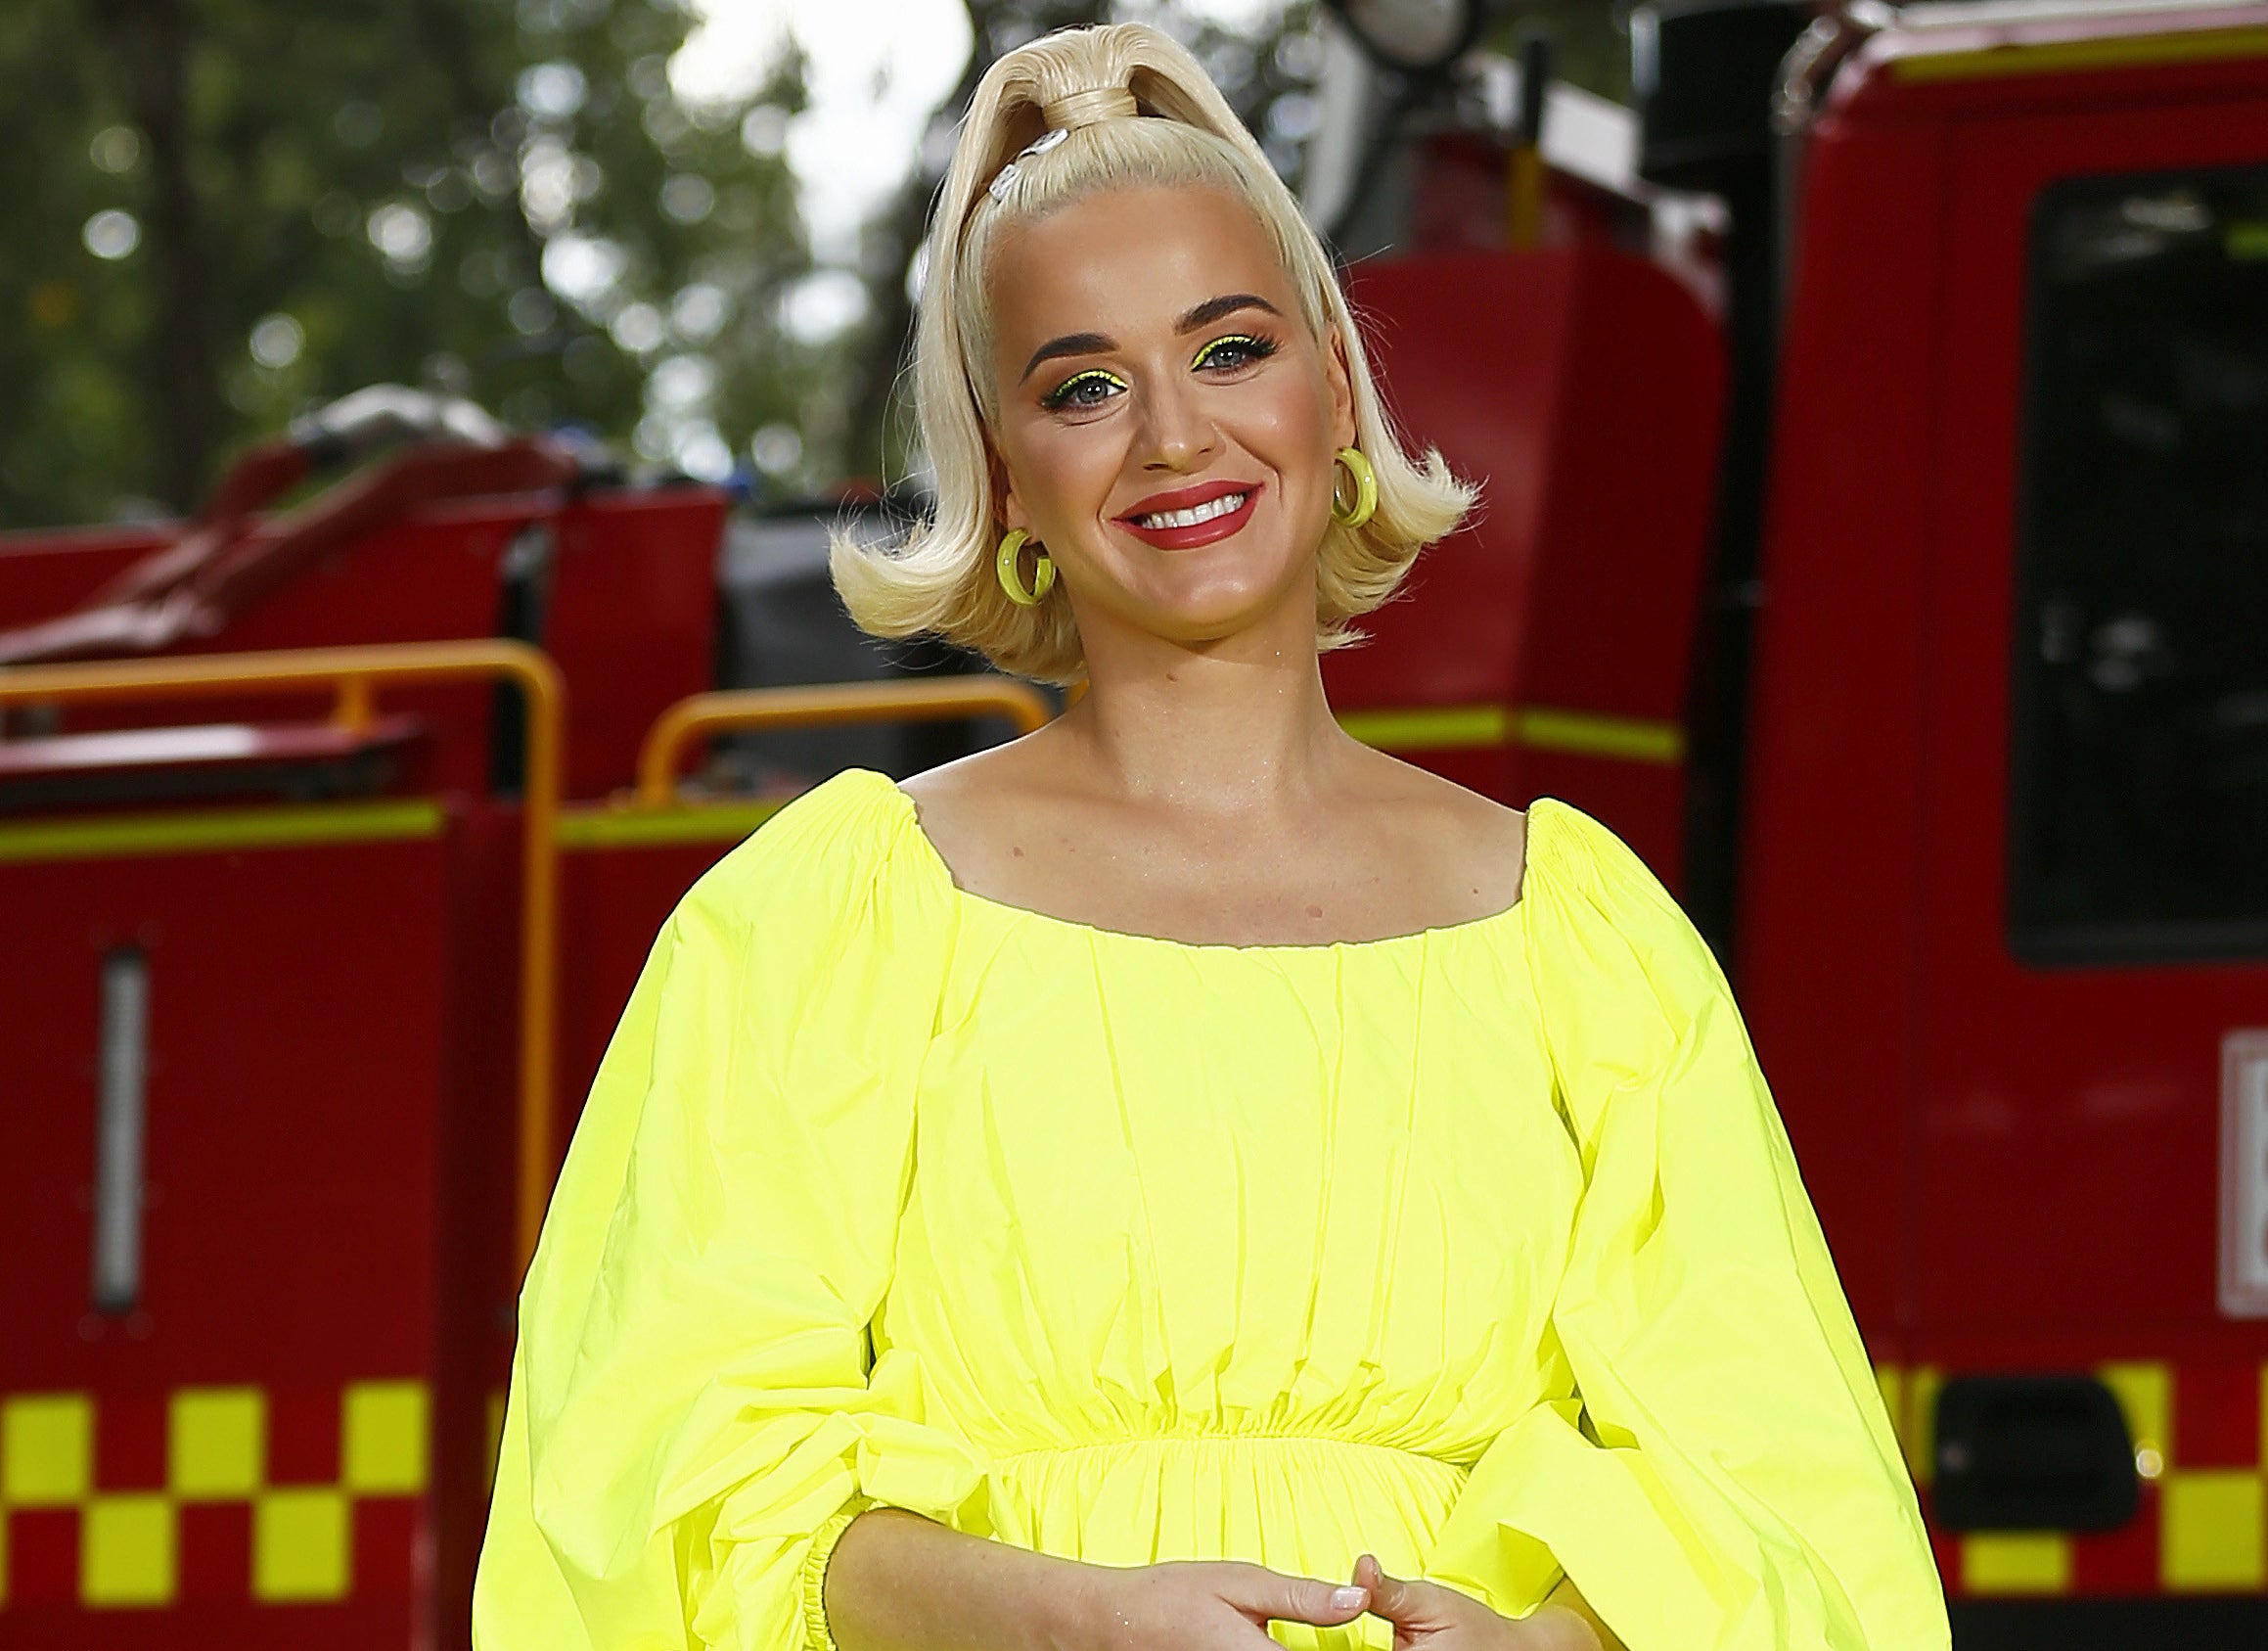 Katy smiles in a brihgt yellow dress